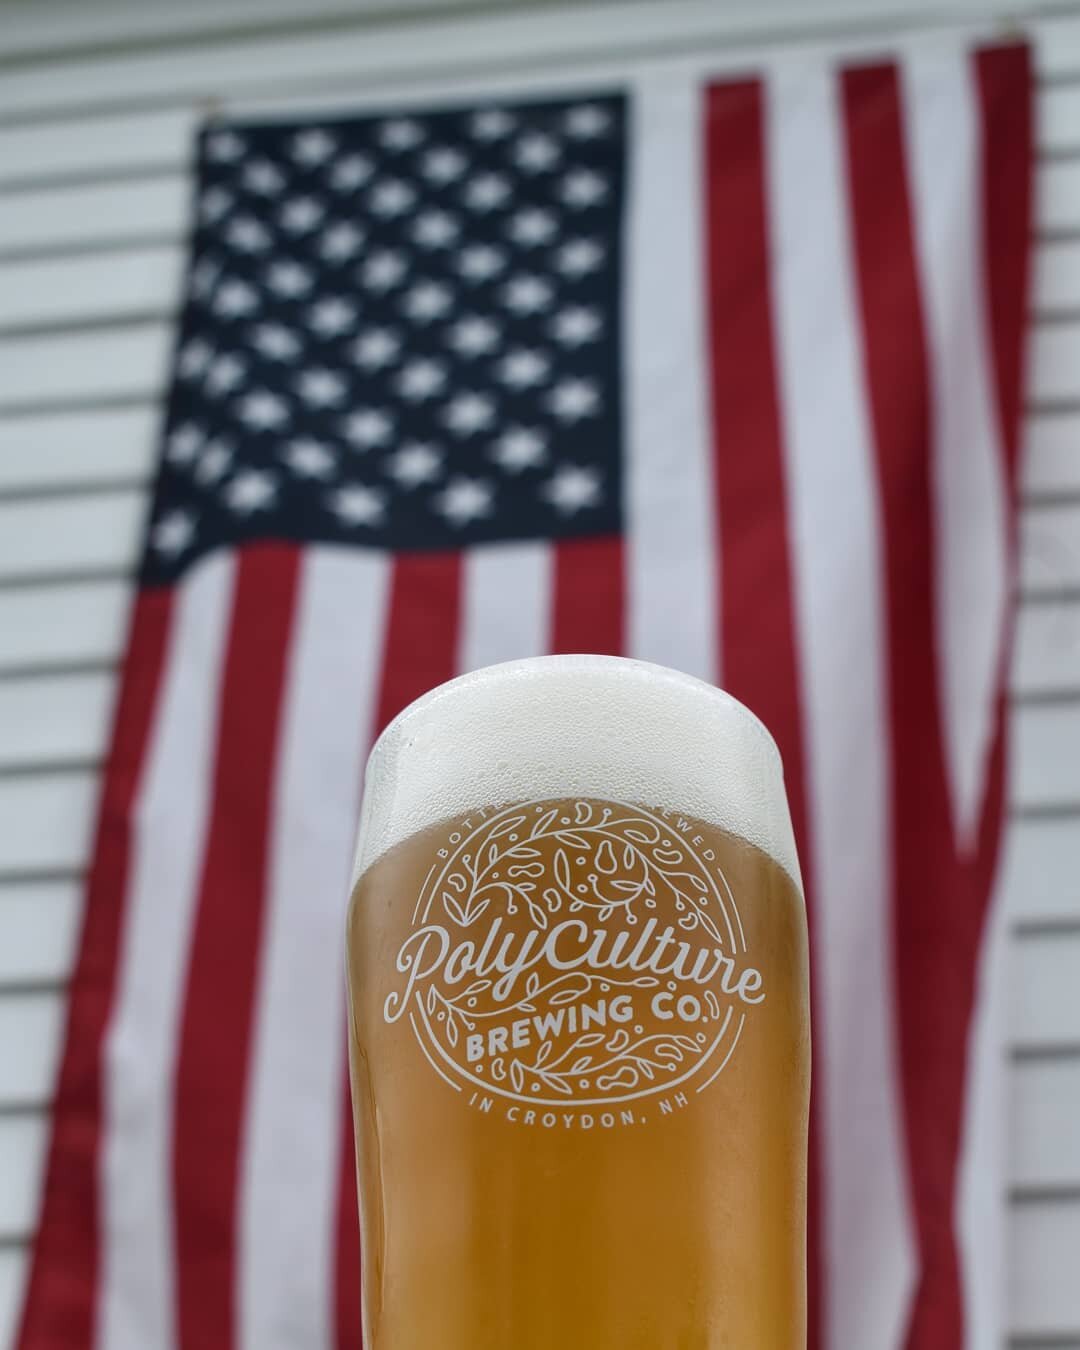 Happy 4th! Thanks to everyone who braved the elements to celebrate with us yesterday - your support means everything. Cheers!
.
.
.
#NHbeertrail #NHbeer #KeepNHbrewing #indepentbeer #independenceday #happyfourth🇺🇸 #heyuppervalley #NHsummer #familyo